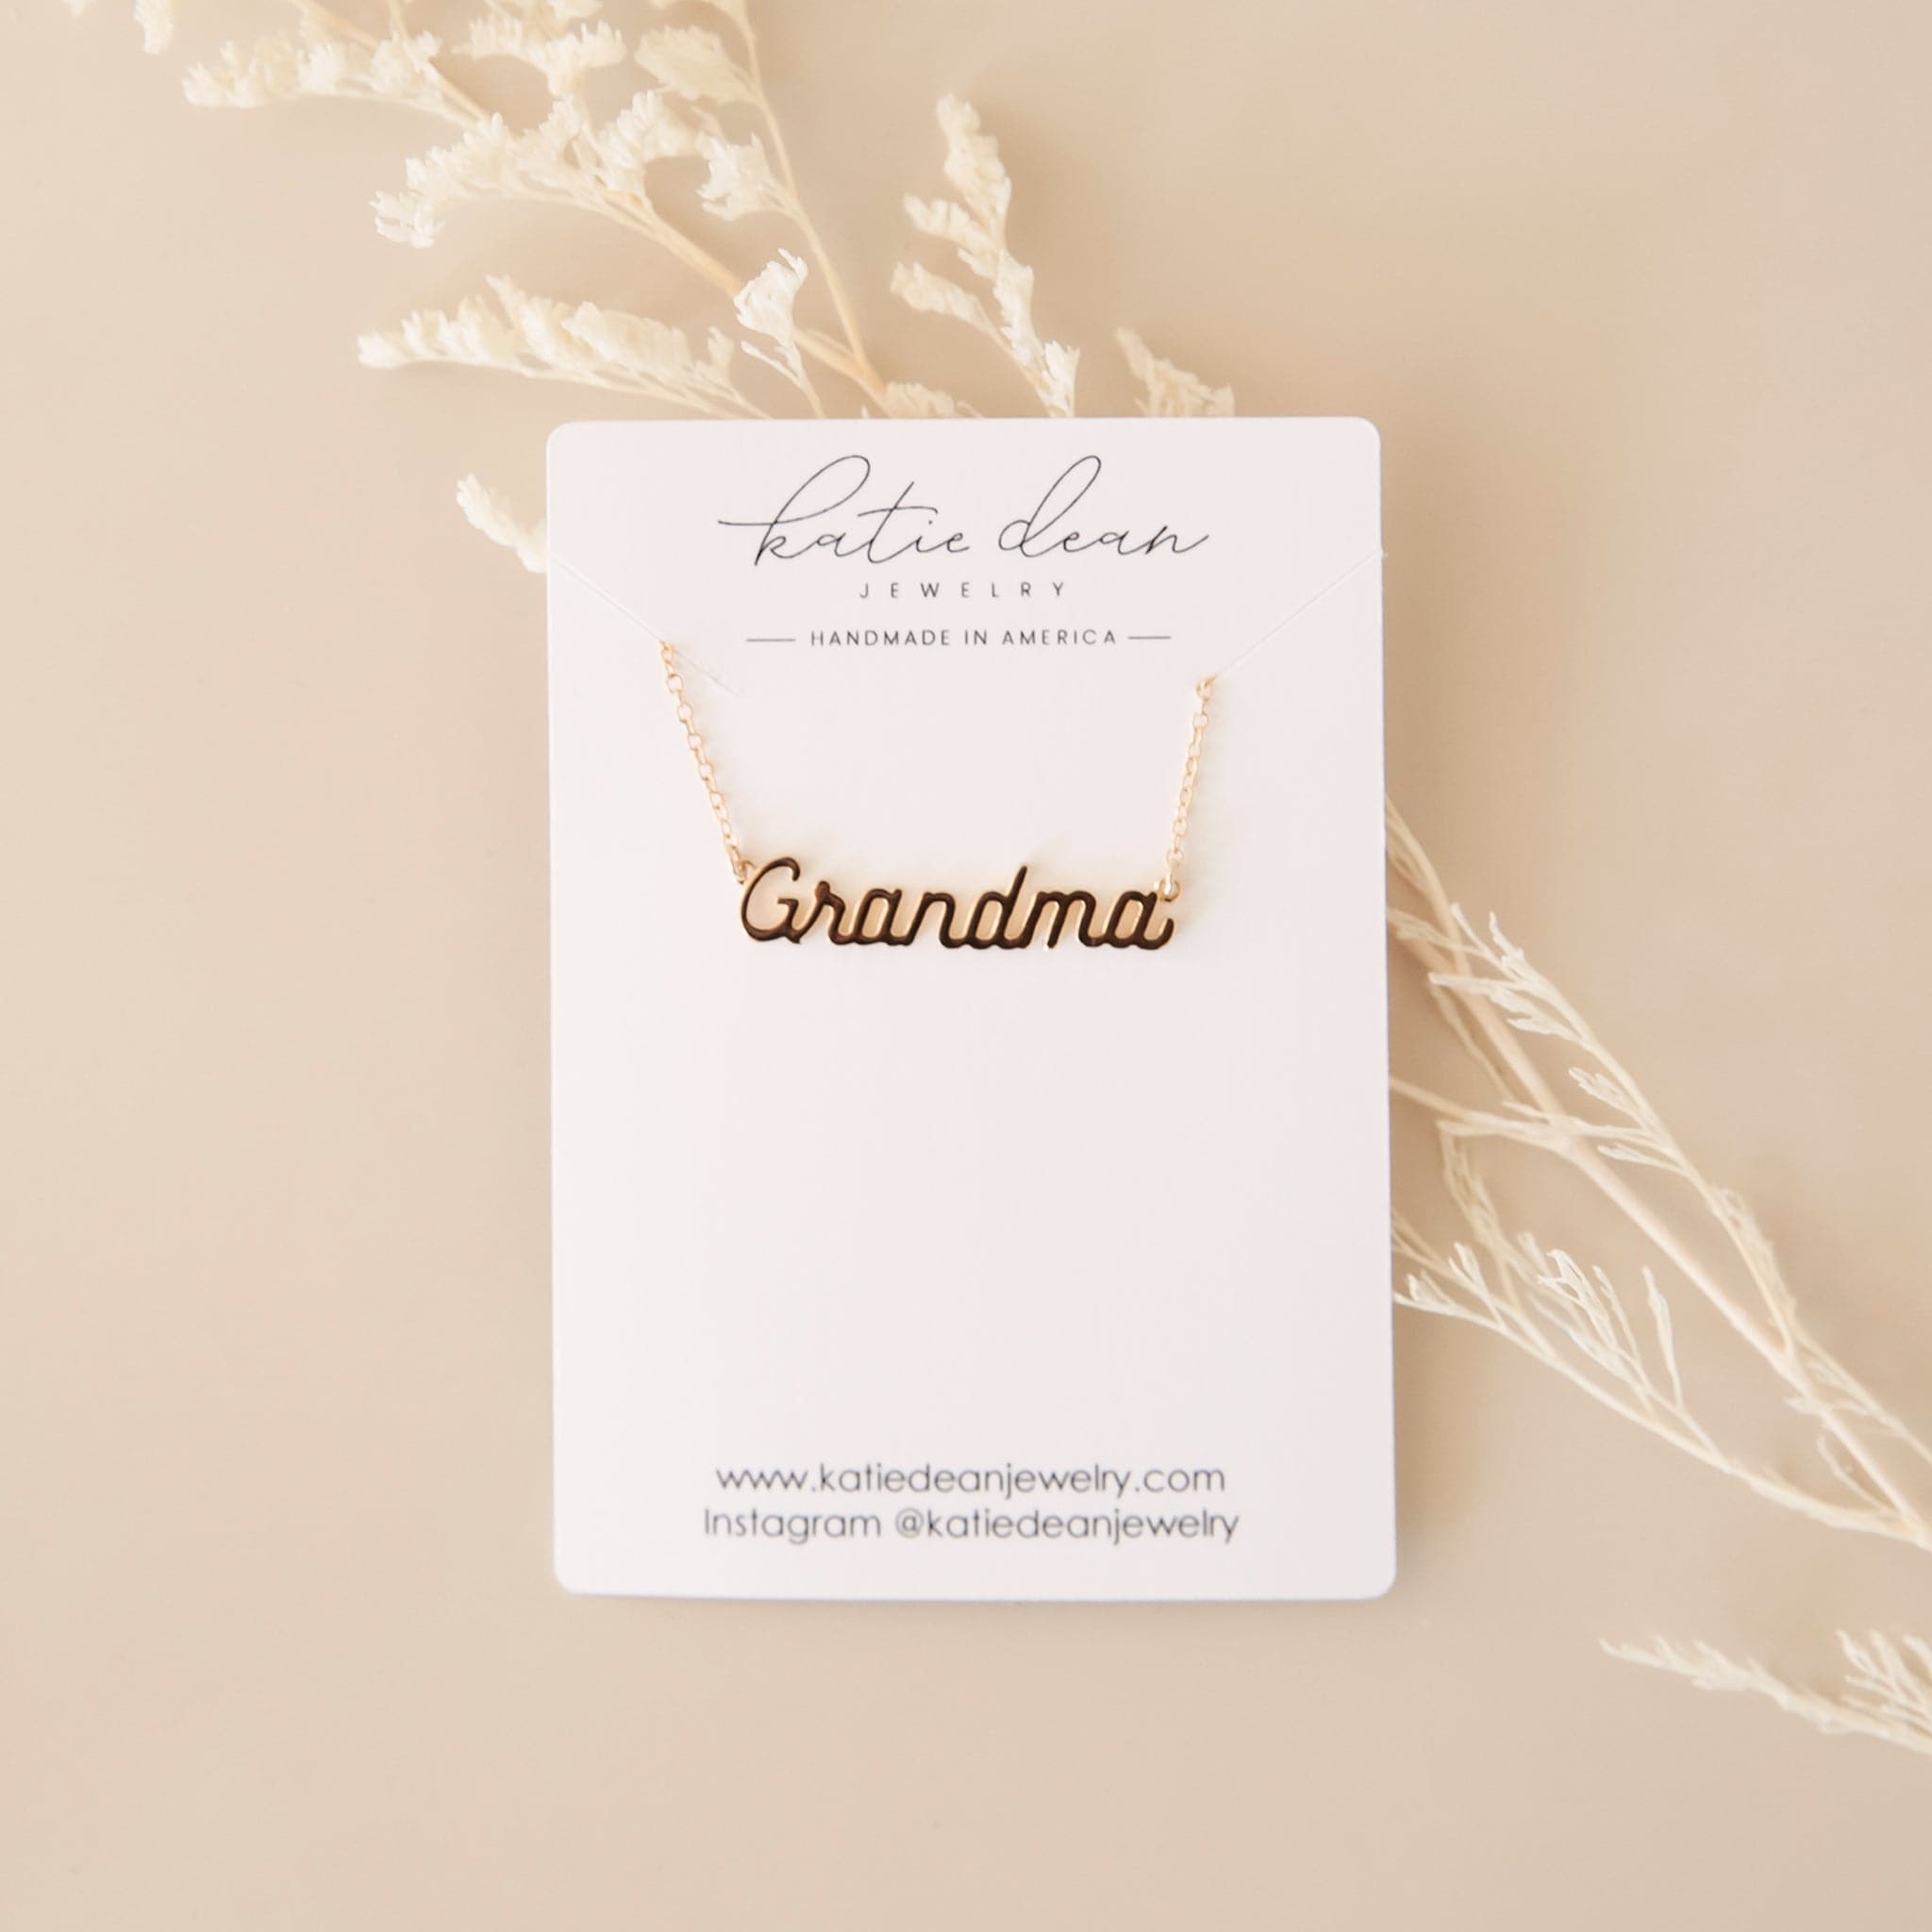 A dainty gold chain necklace with gold letters that read, &quot;Grandma&quot; as a pendant on a white cardboard rectangle that reads, &quot;Katie Dean Jewelry&quot;.